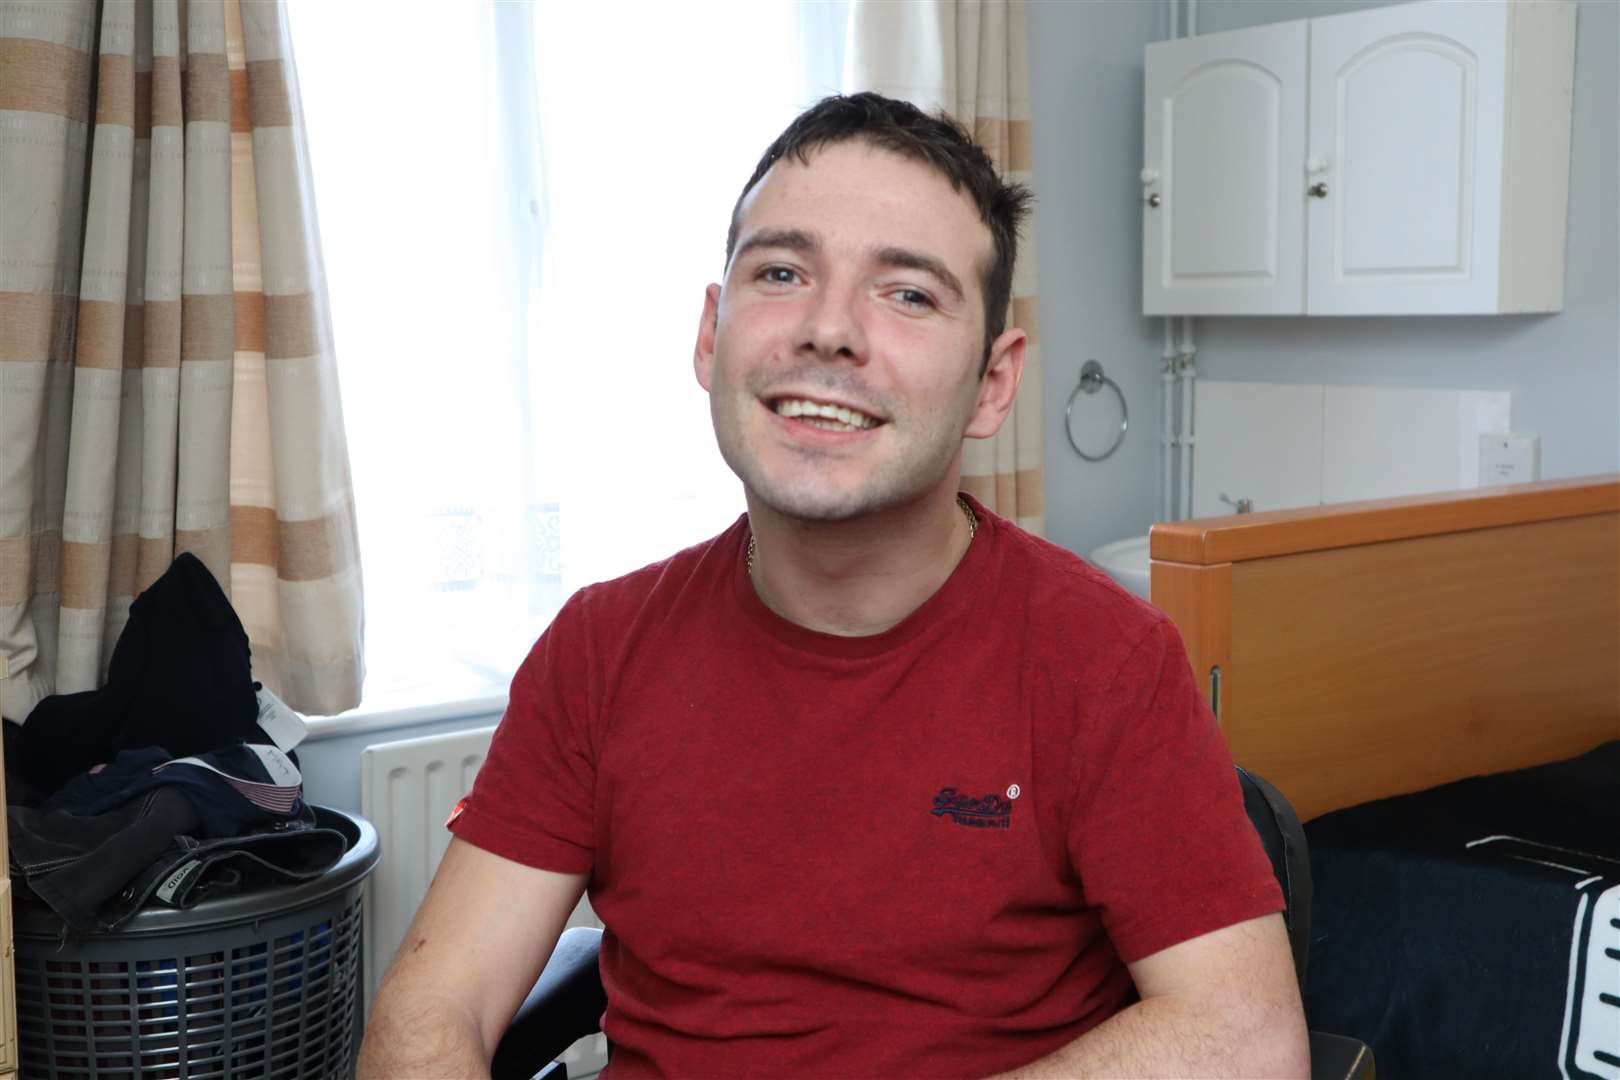 Matt Dye, 29, from Faversham has his own flat at the Little Oyster residential home on The Leas at Minster, Sheppey